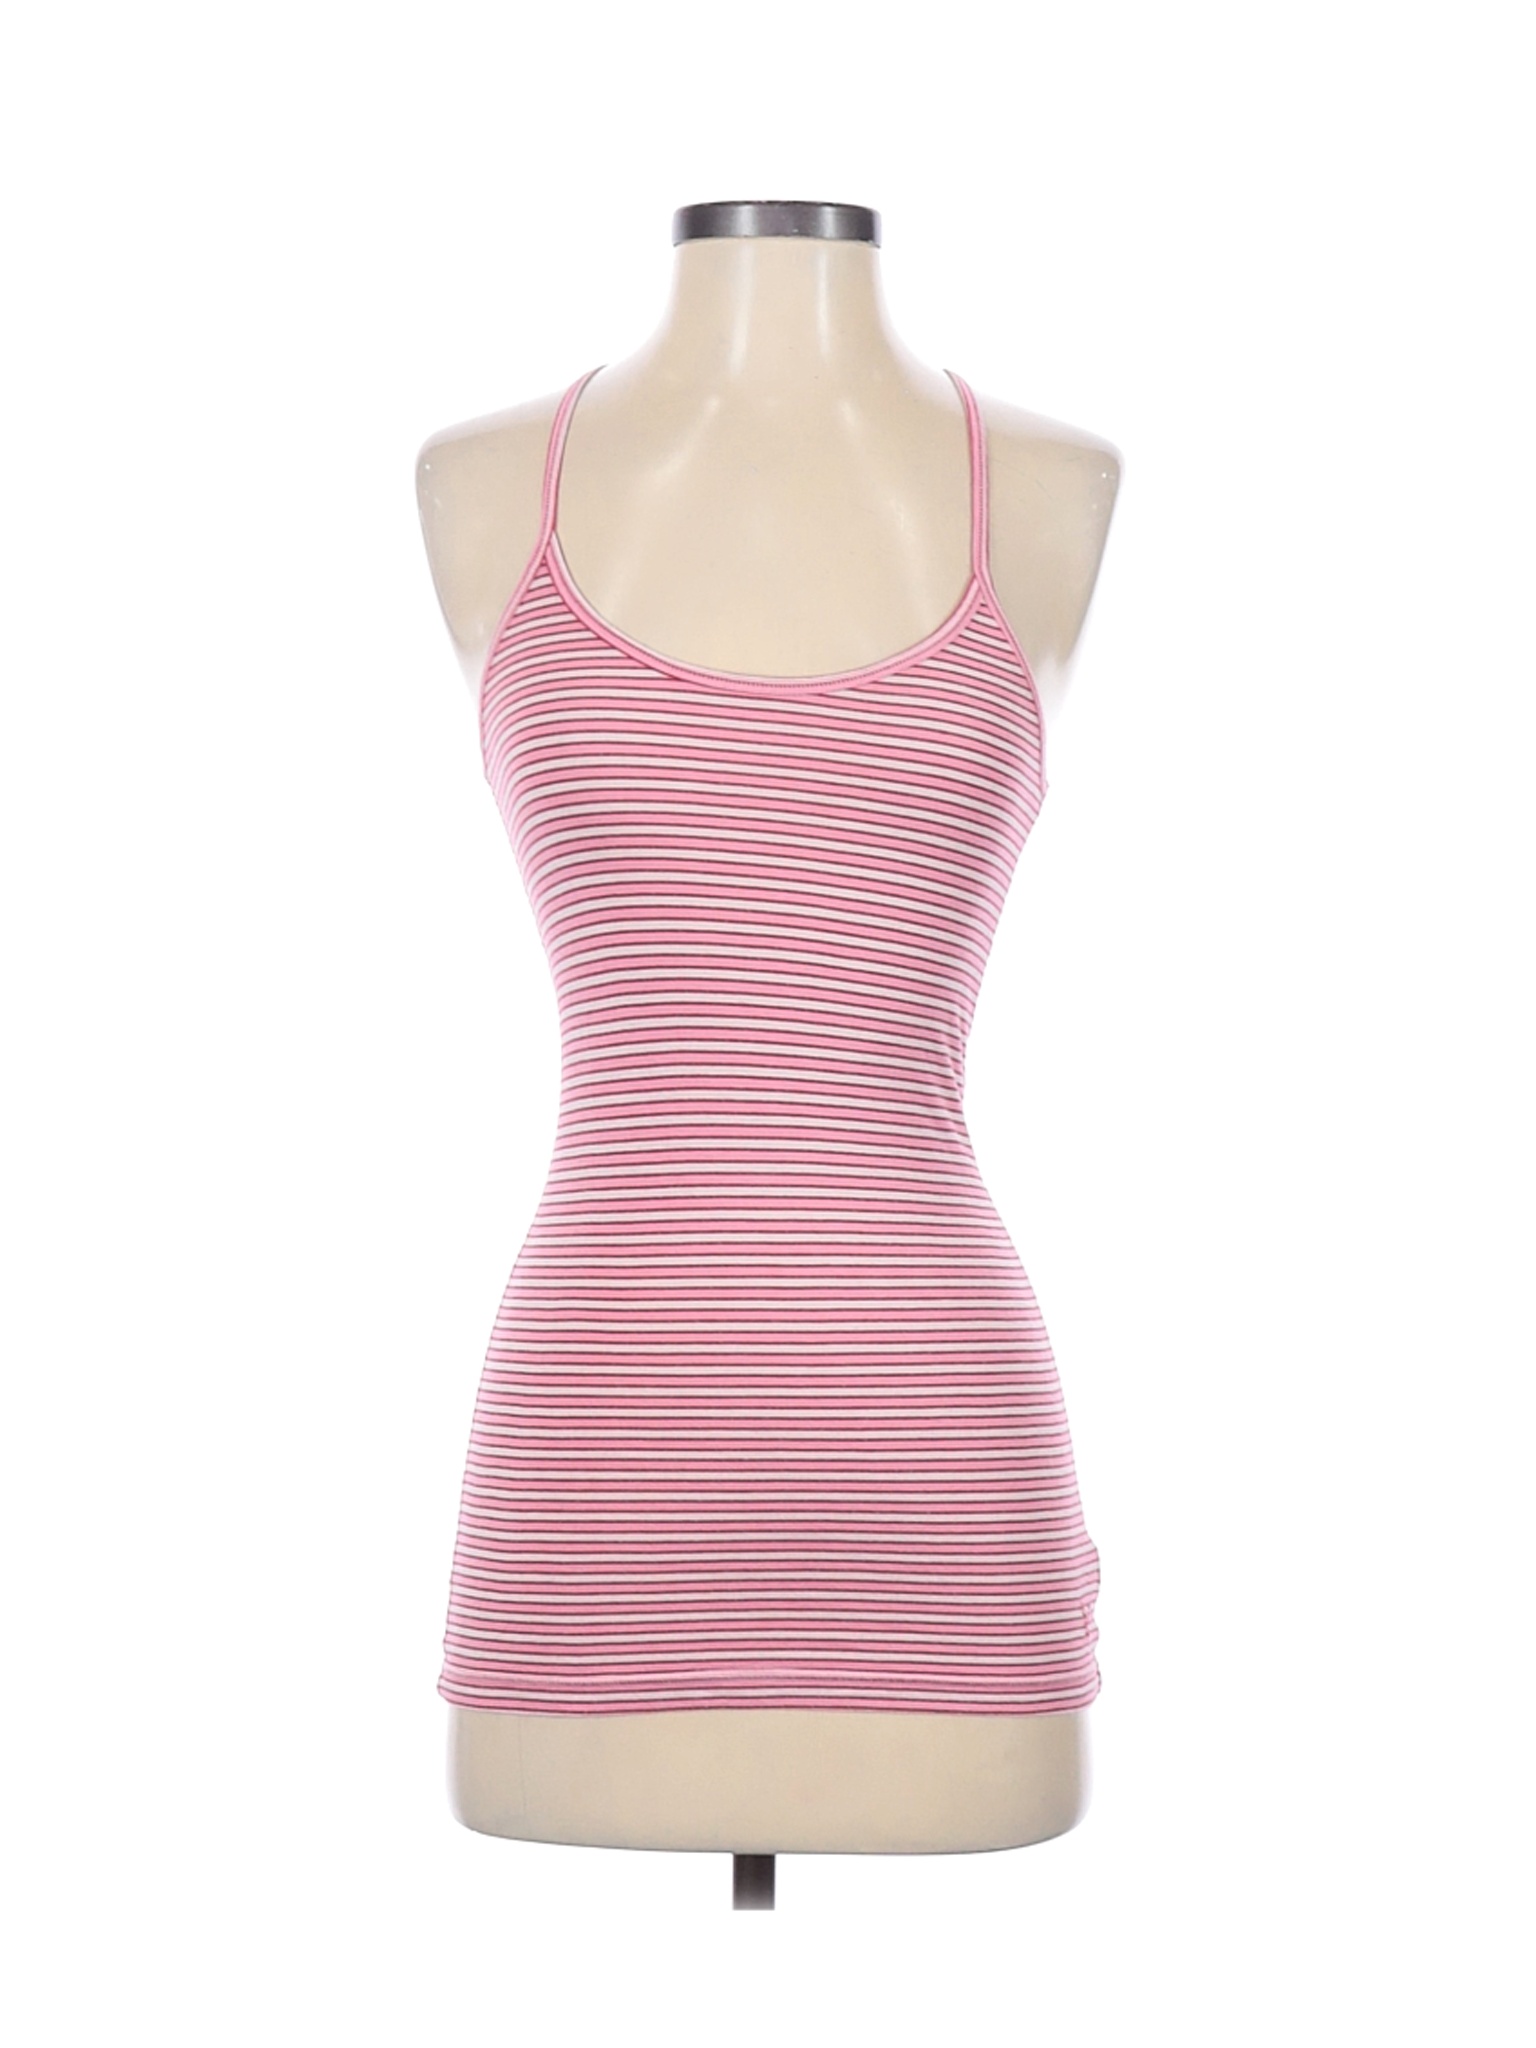 American Eagle Outfitters Women Pink Tank Top XS | eBay